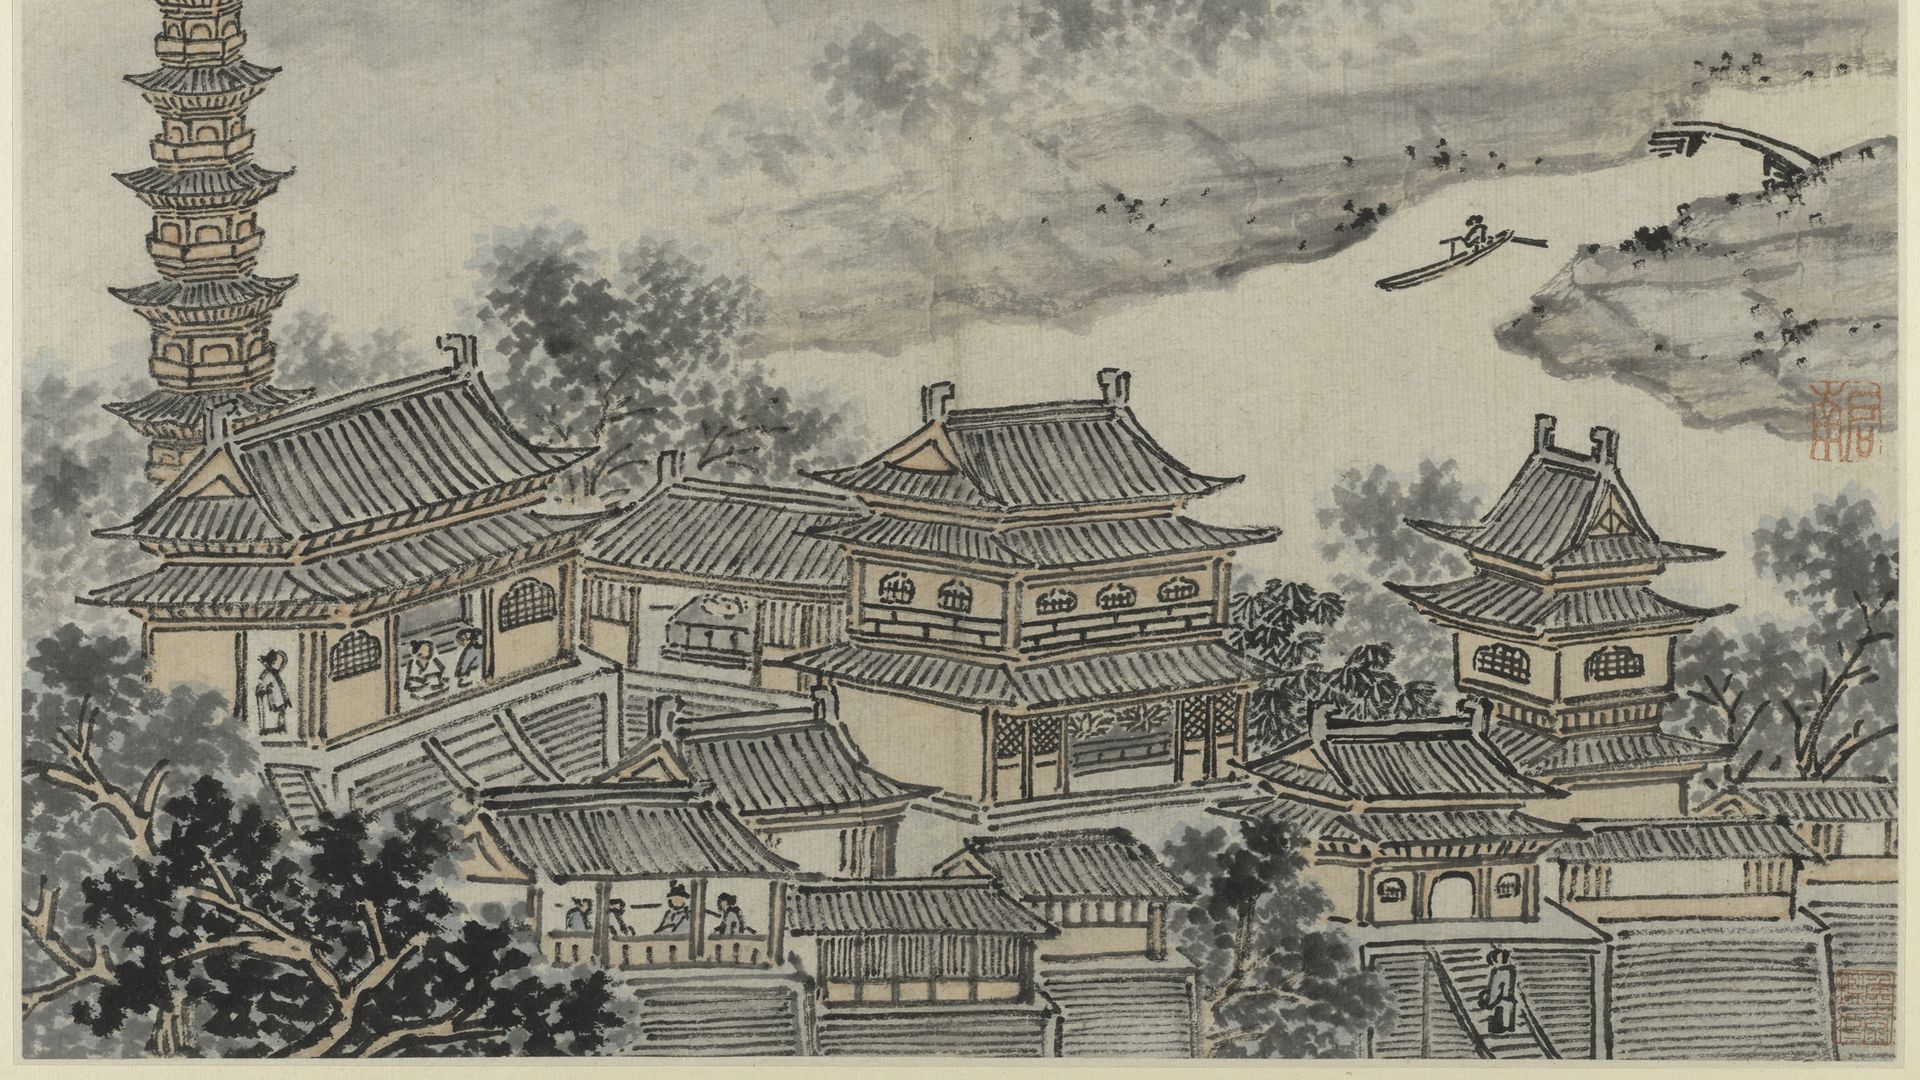 A Chinese ink on paper drawing from the 15th century featuring a village on the banks of a mountain river